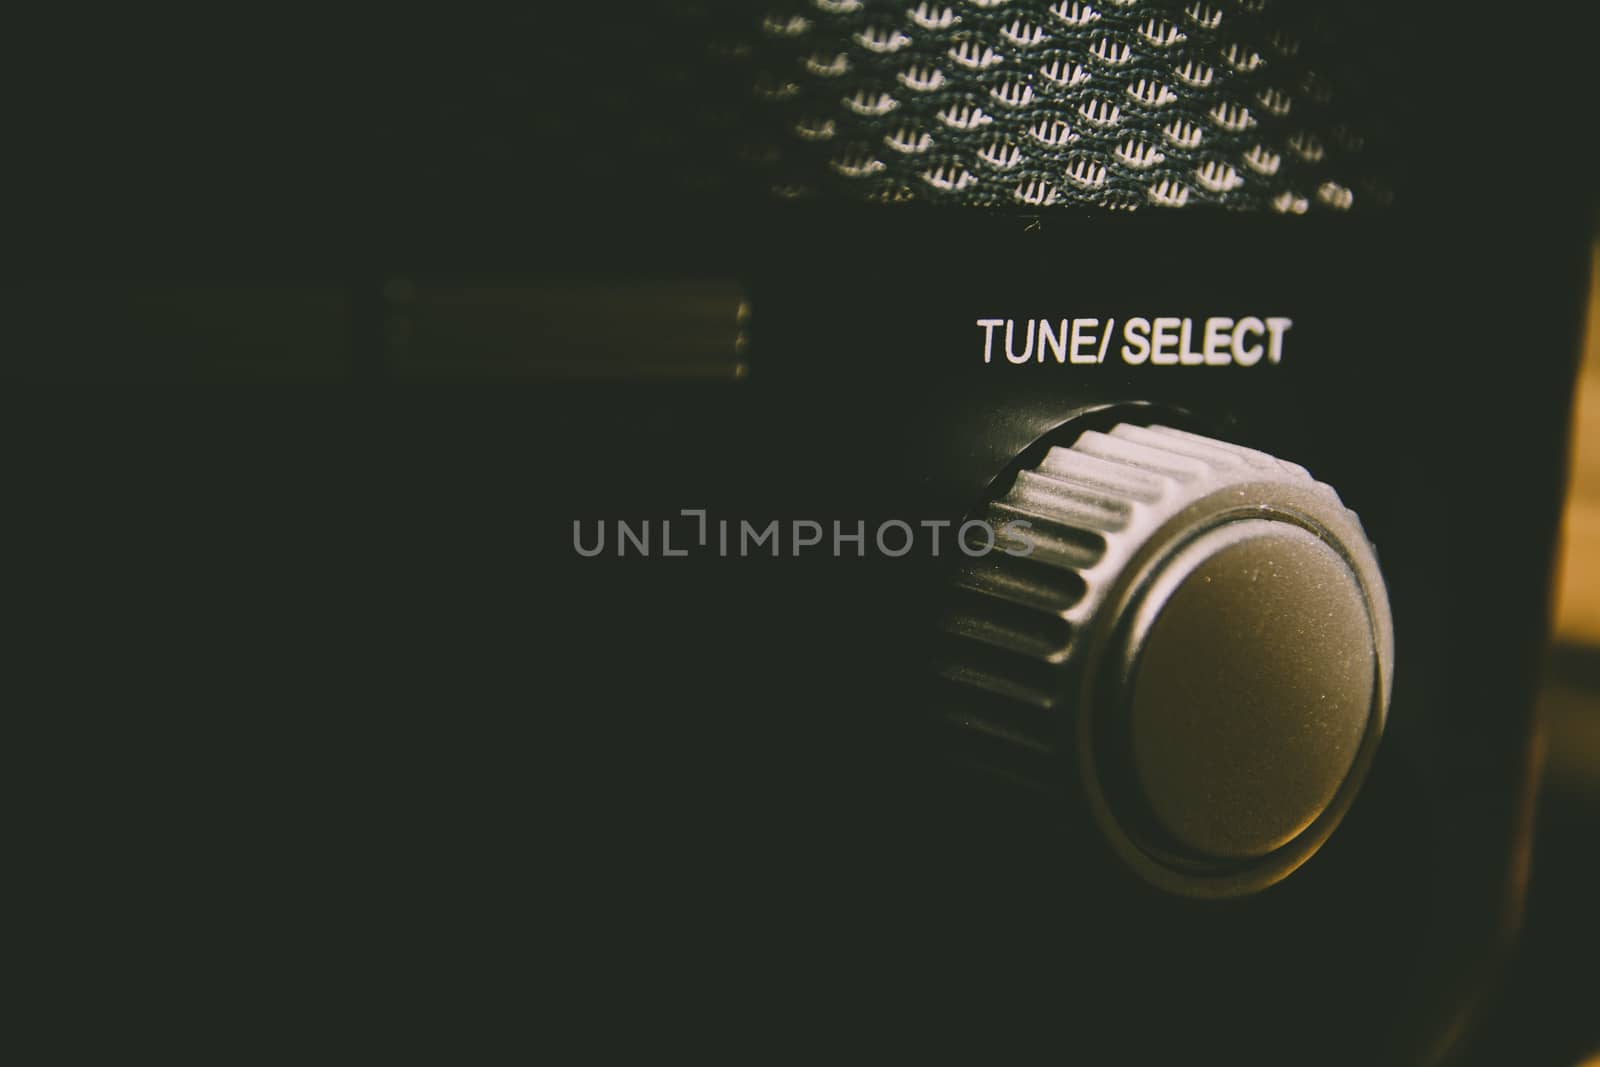 tune, select, knob, button, retro, vintage, finetuning, copy space, old-fashioned, device, wheel, turning, selecting, tuning, tuner, station, radio, creative processing